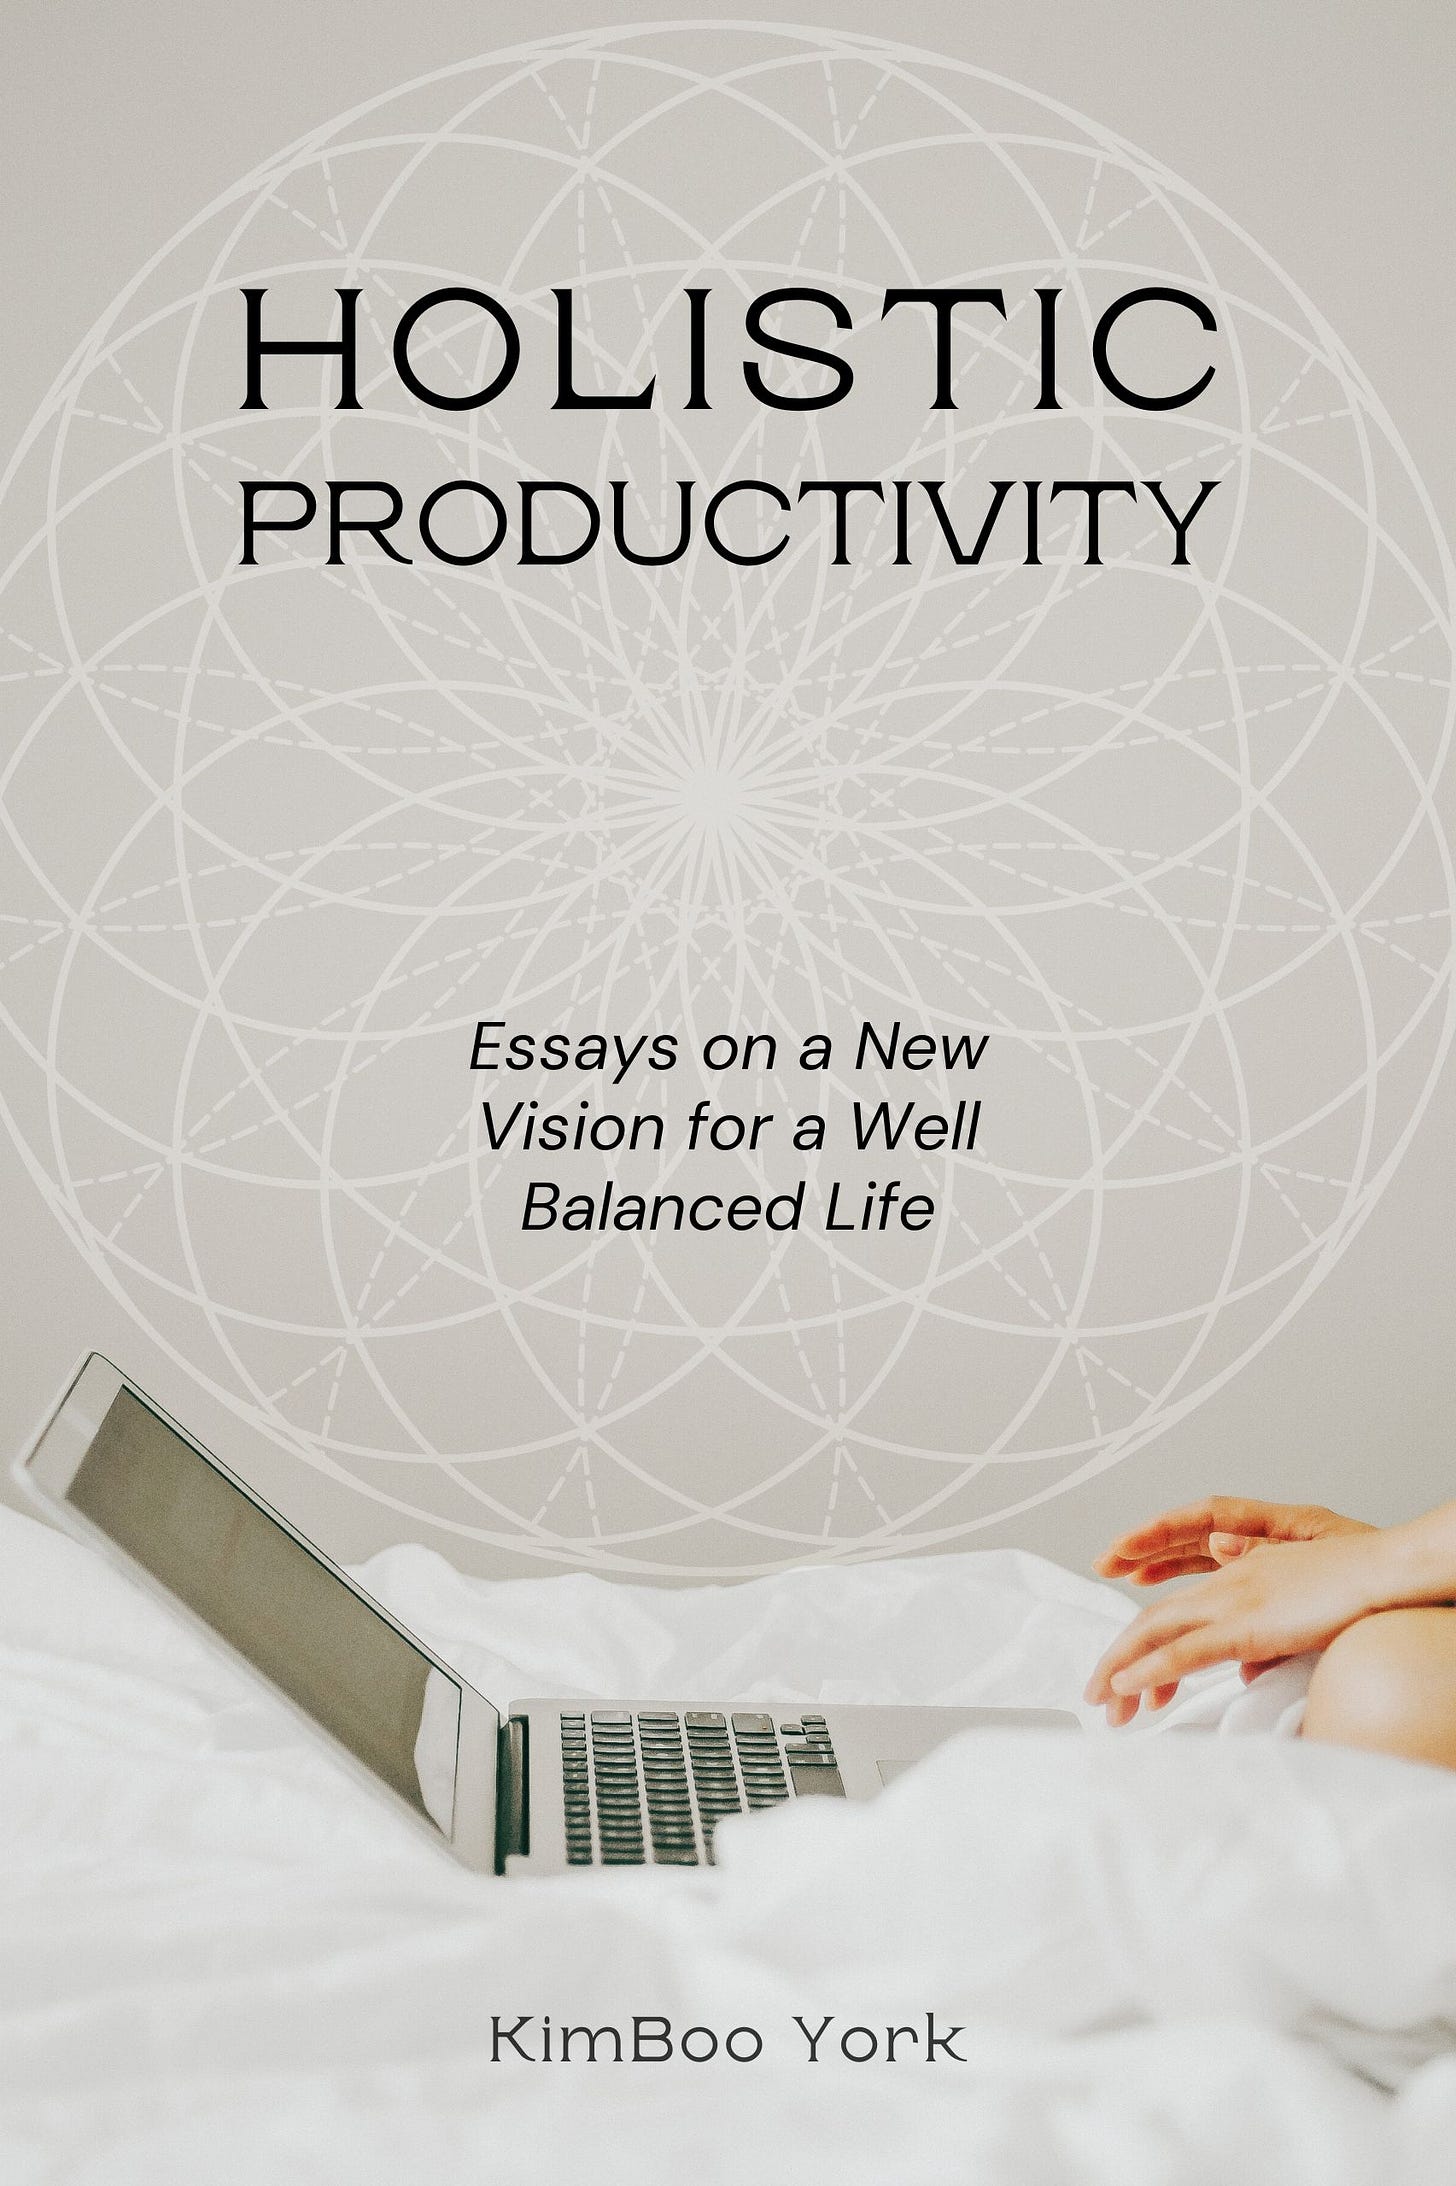 Working cover design for book: Holistic Productivity